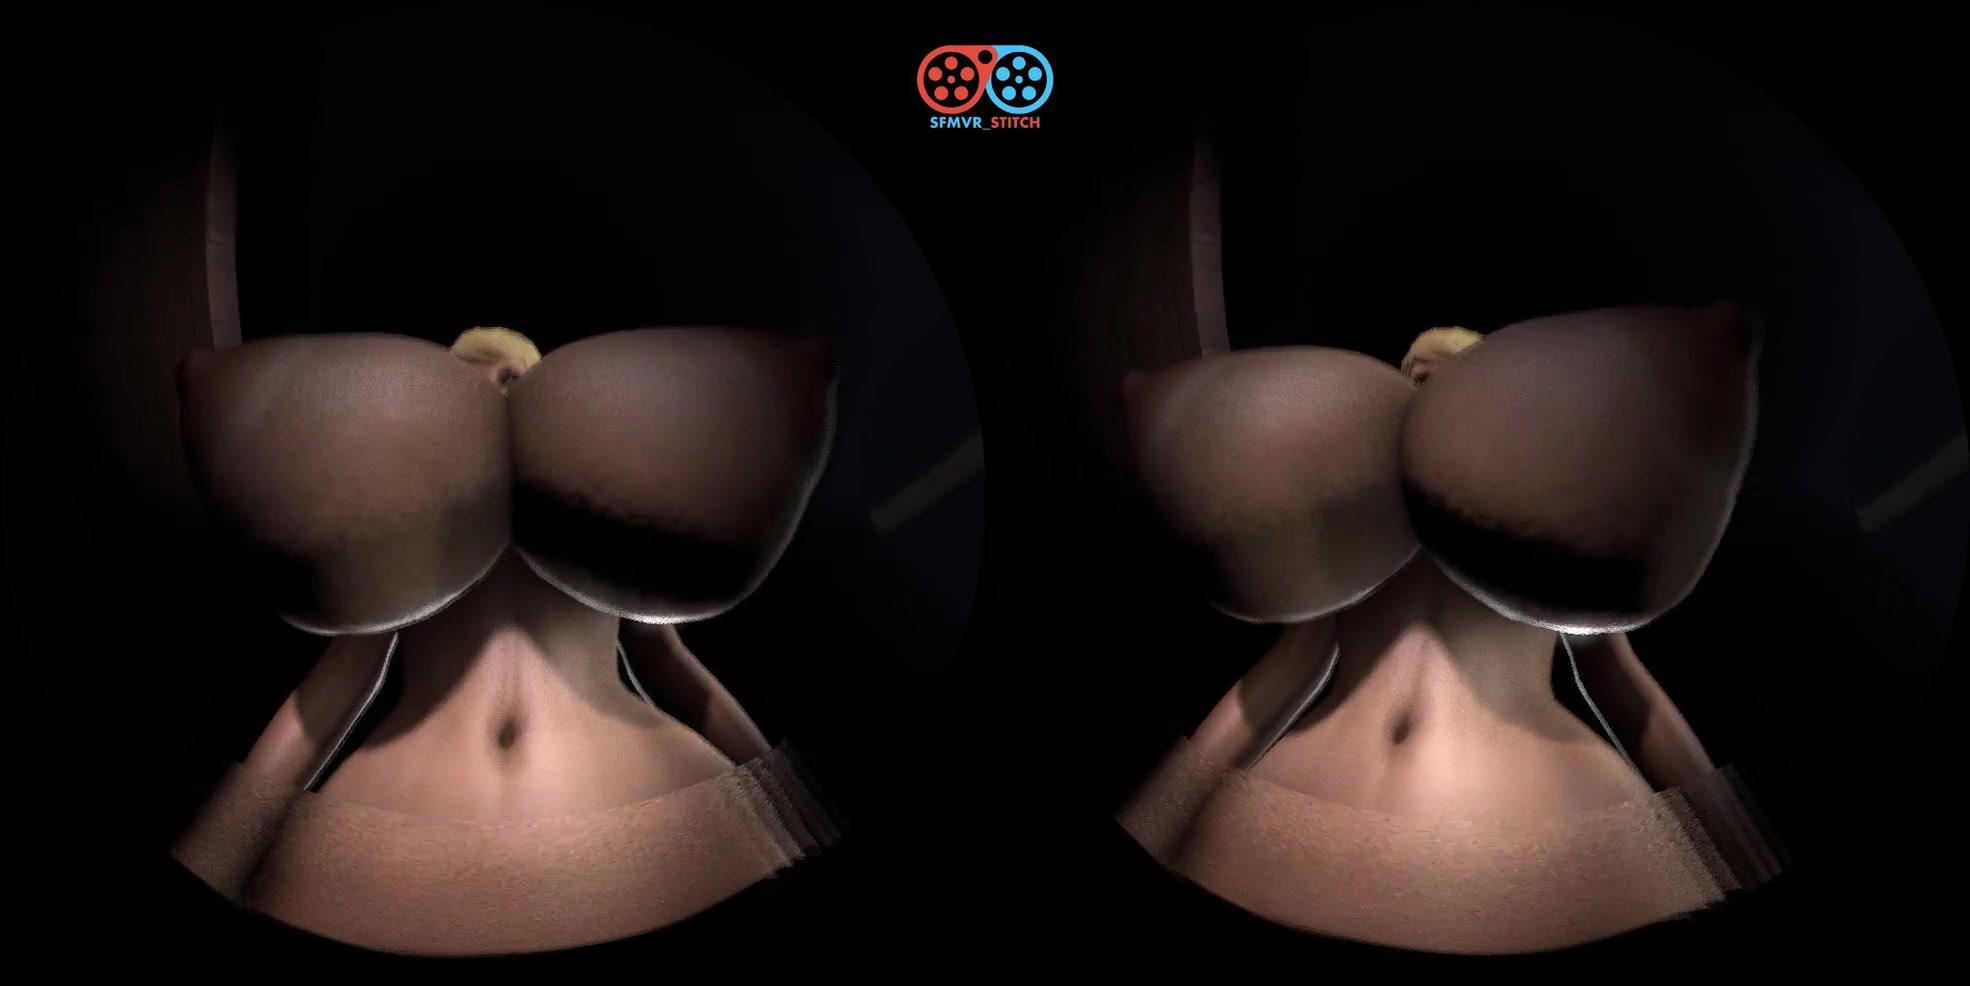 Buster recomended breast expansion vr